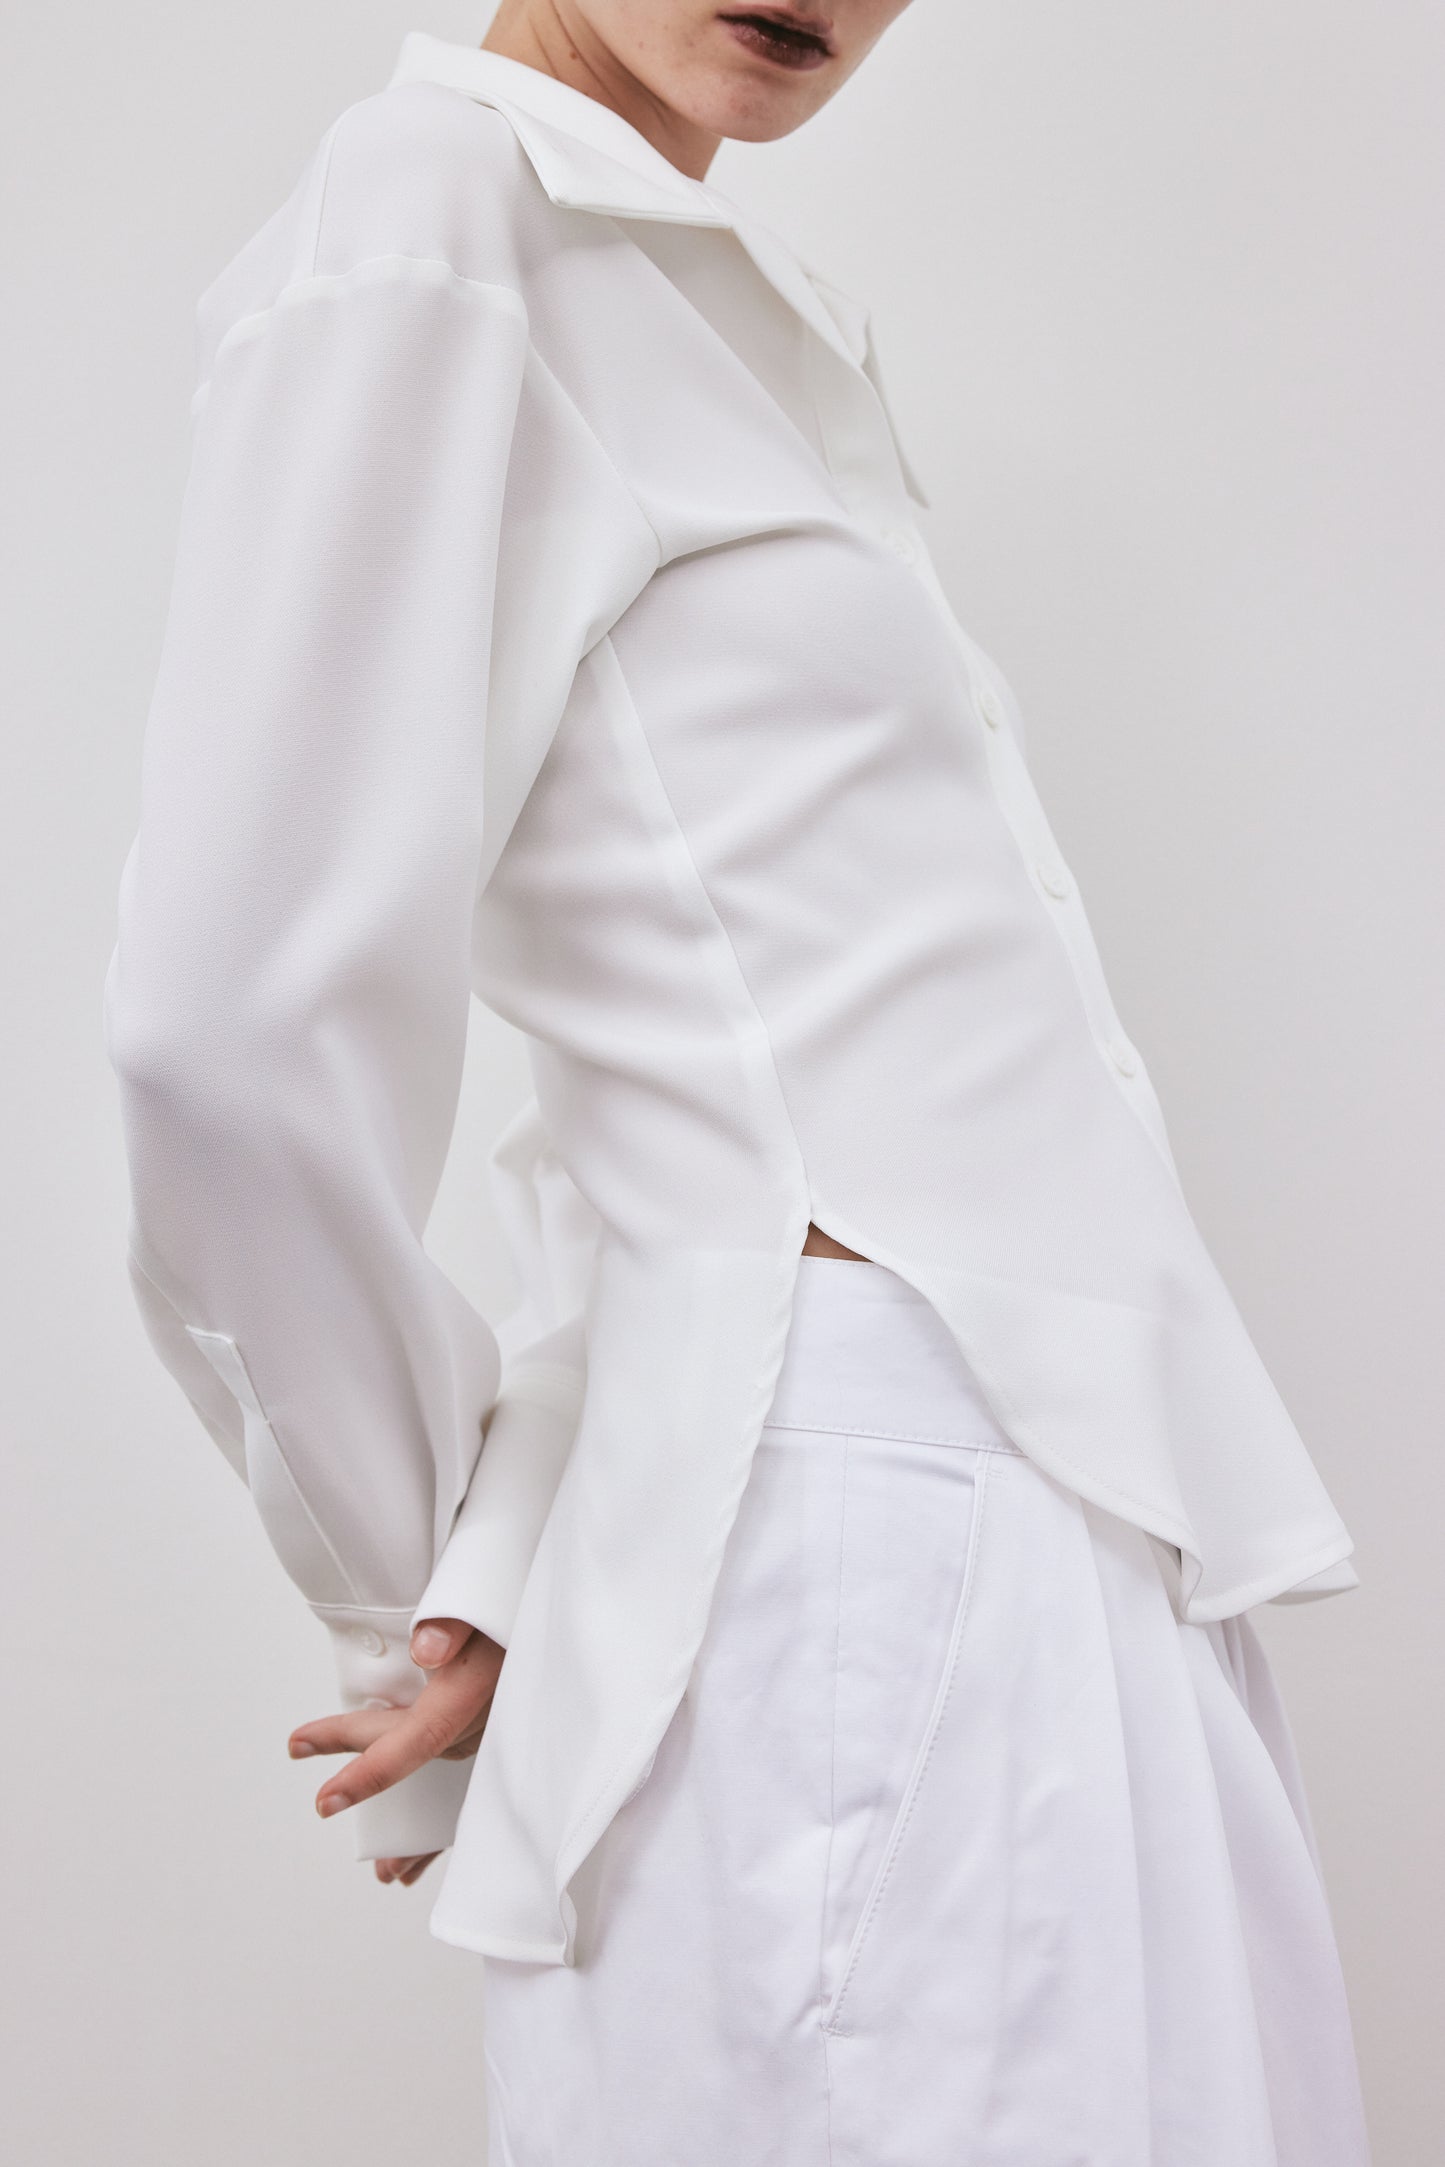 Wide Spread Collar Shirt Blouse, White